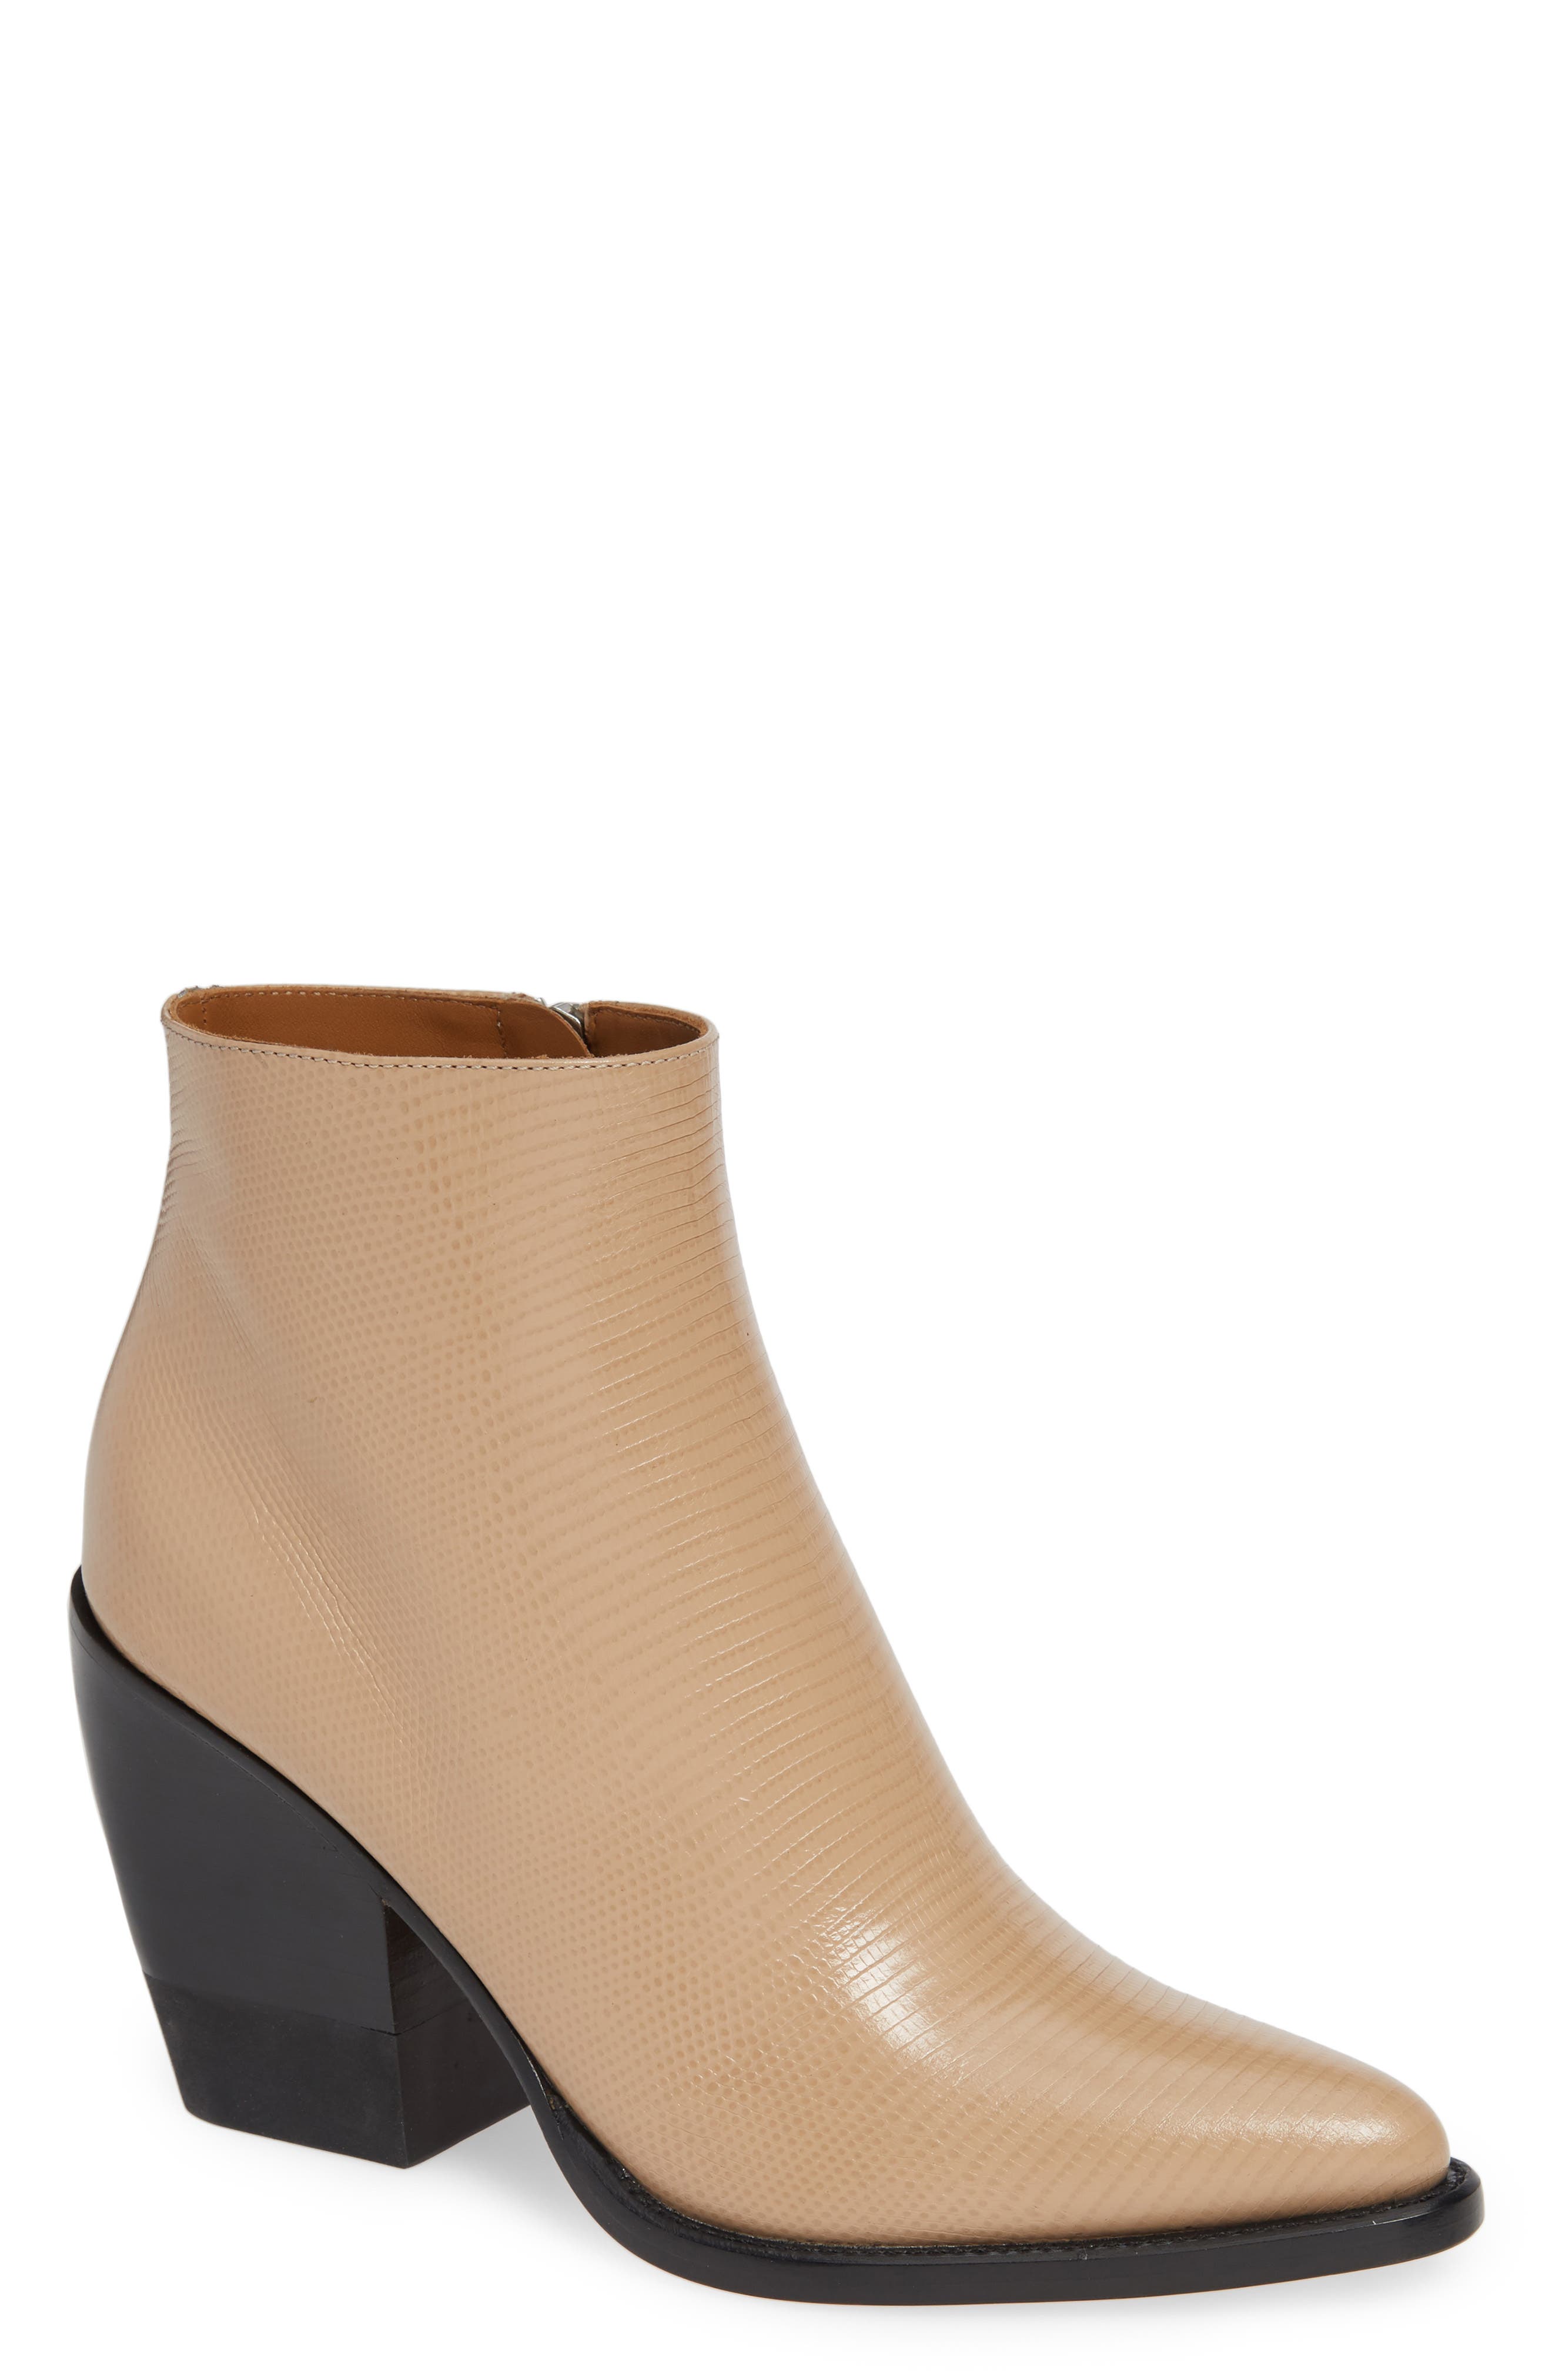 chloé rylee leather ankle boots